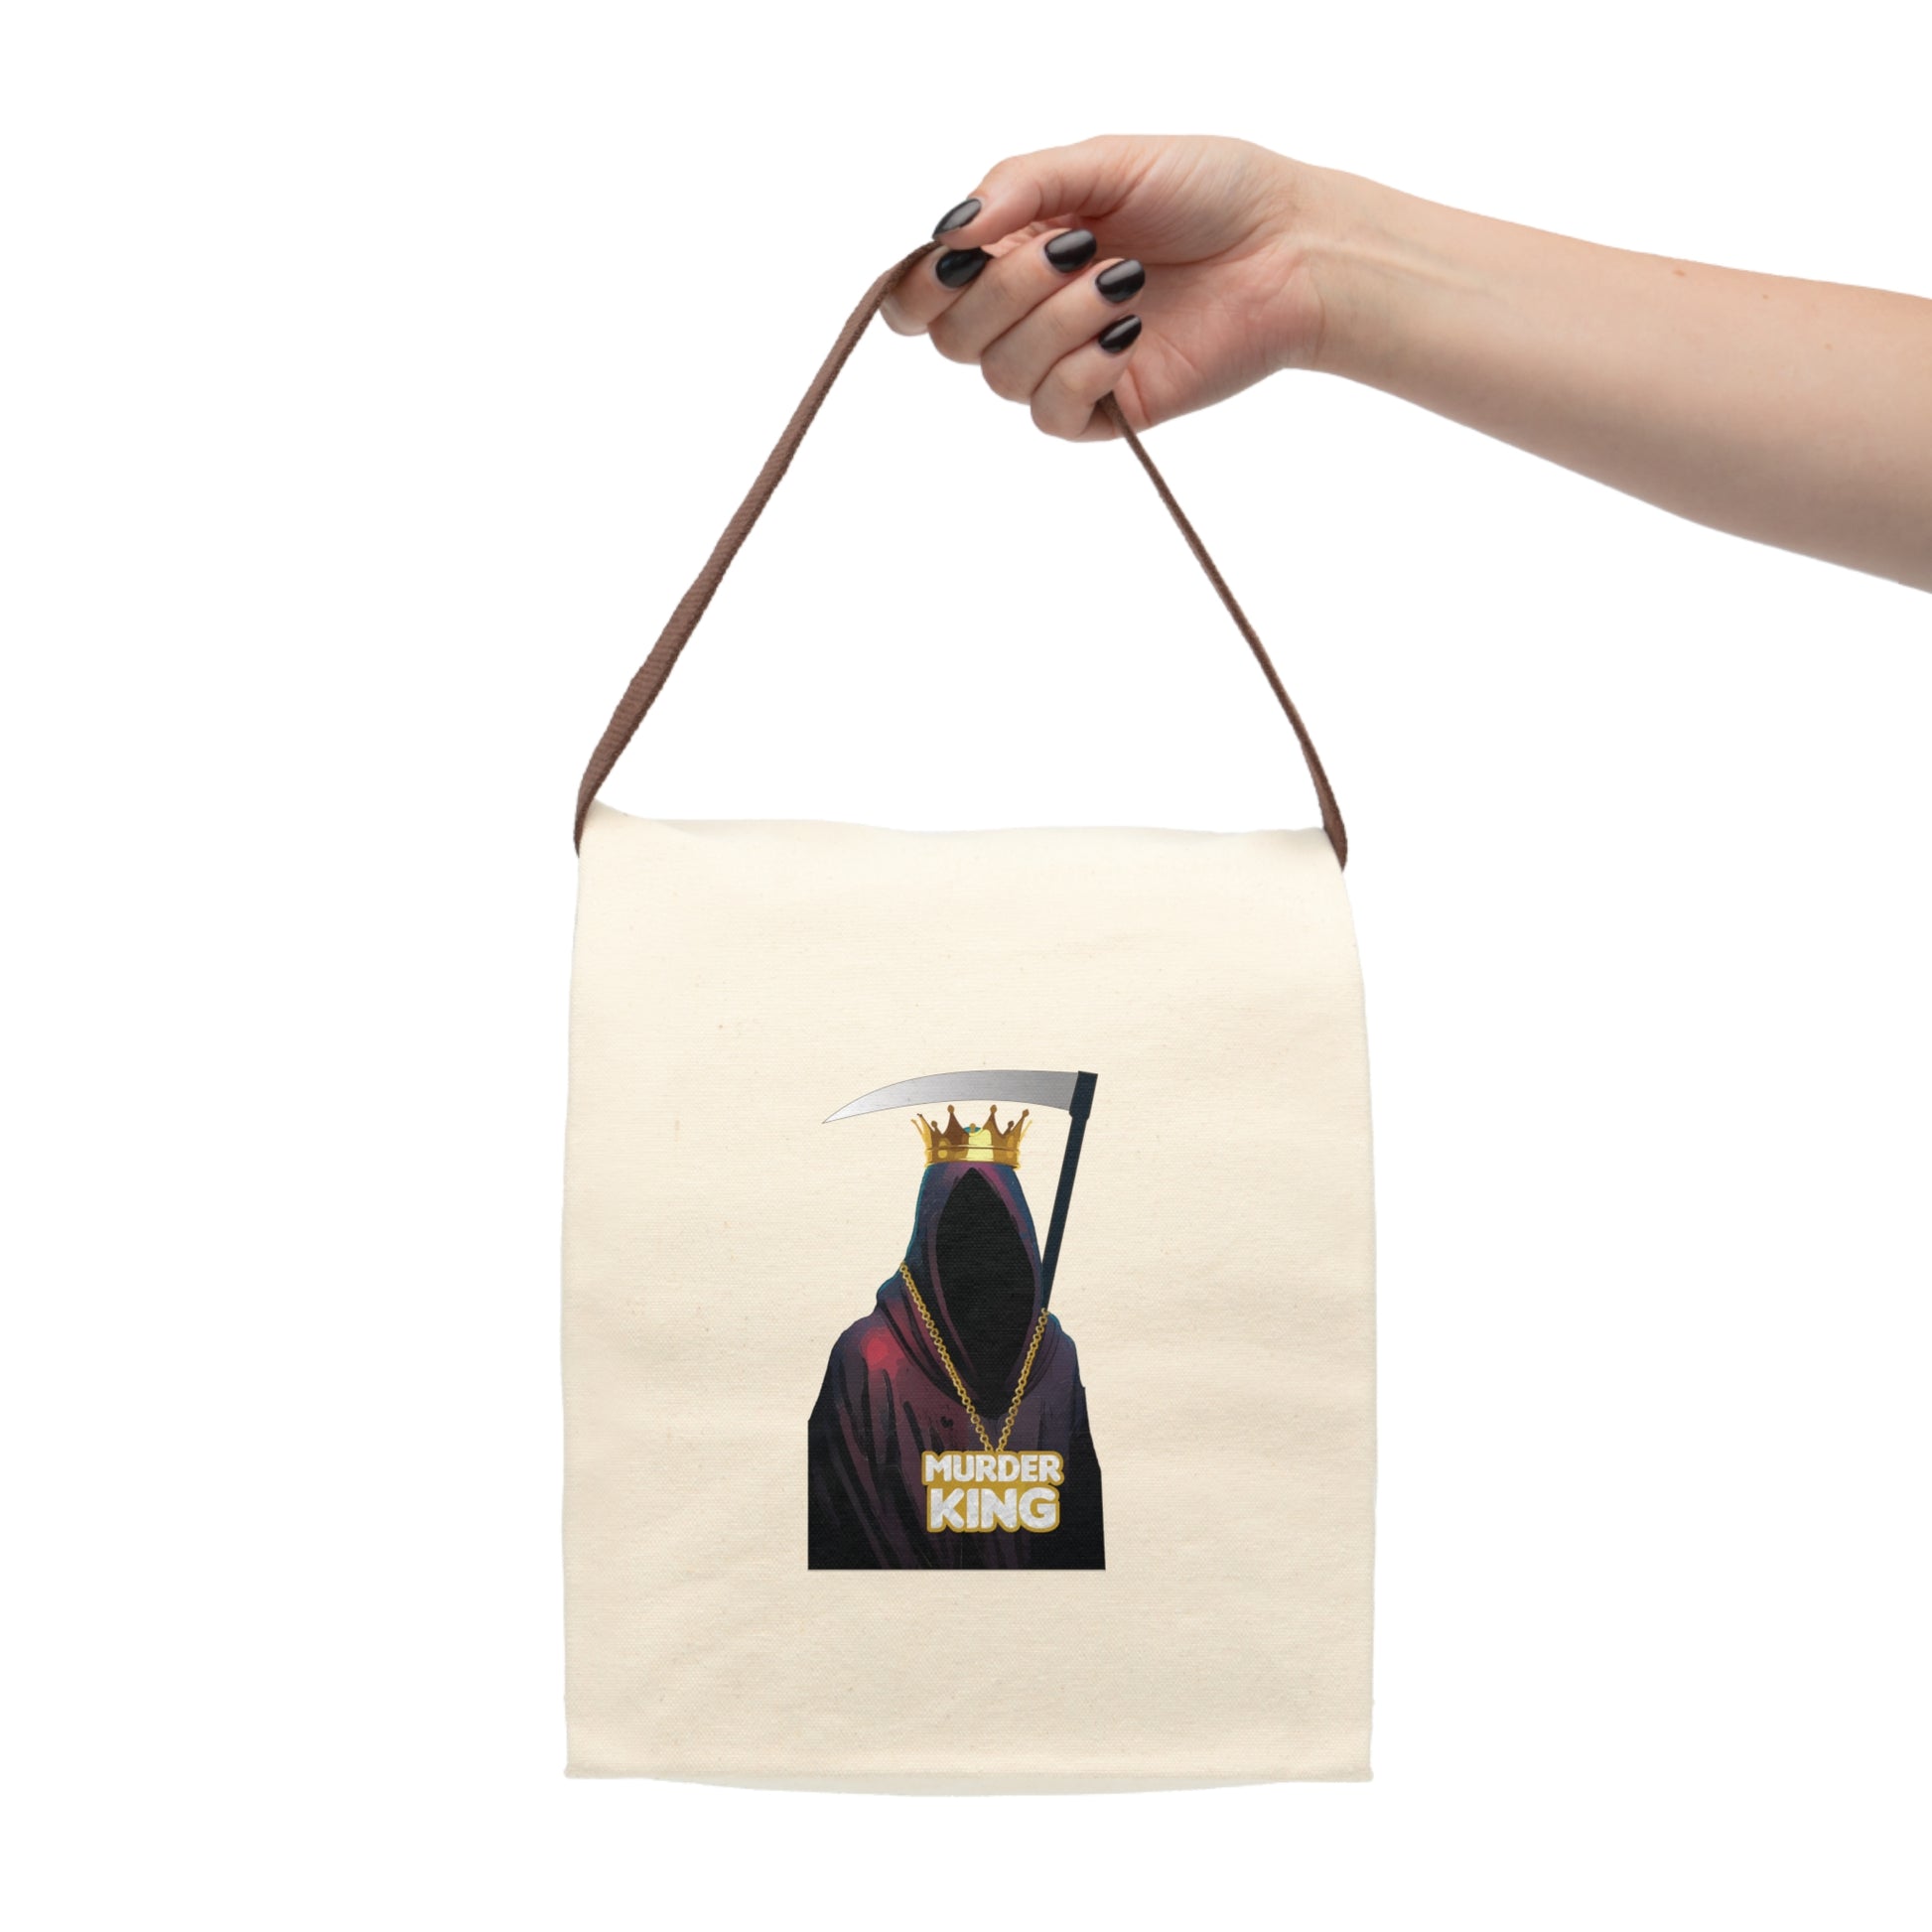 Murder King Canvas Lunch Bag With Strap (Burger King Parody